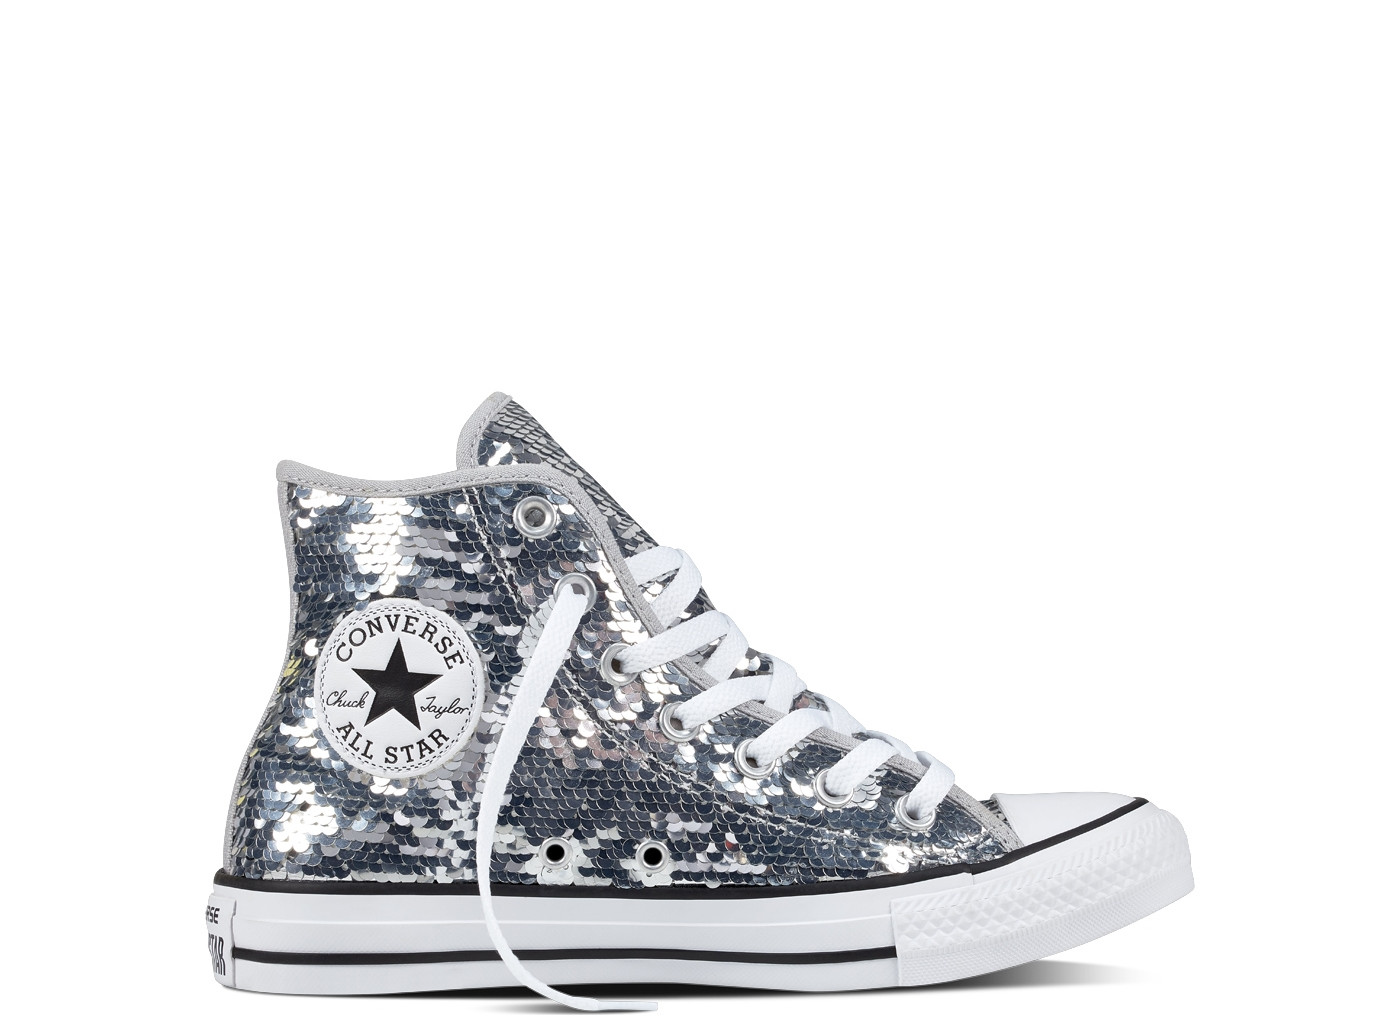 converse sequins - dsvdedommel 